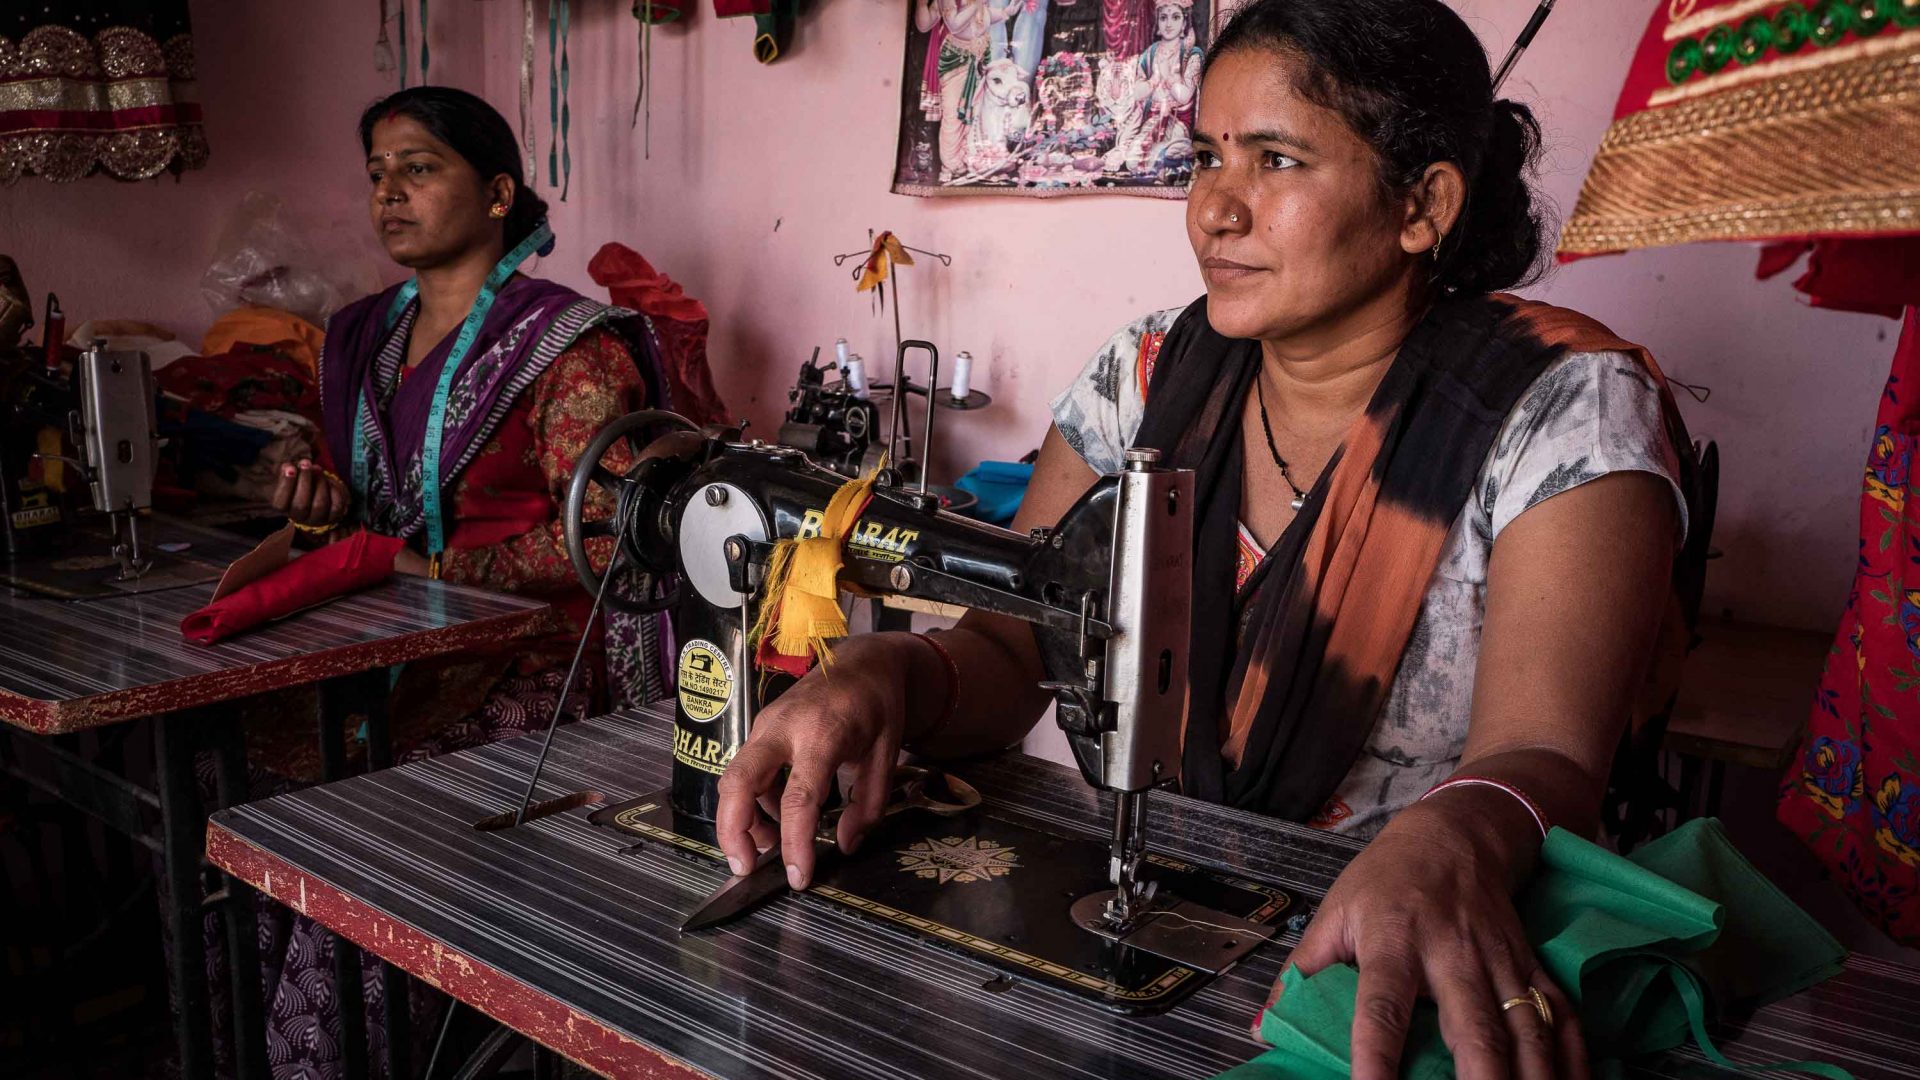 Devi Kapade married when she was 15 years old and at 25 she was widowed with three daughters. WHR gave her three sewing machines to help her achieve economic independence.